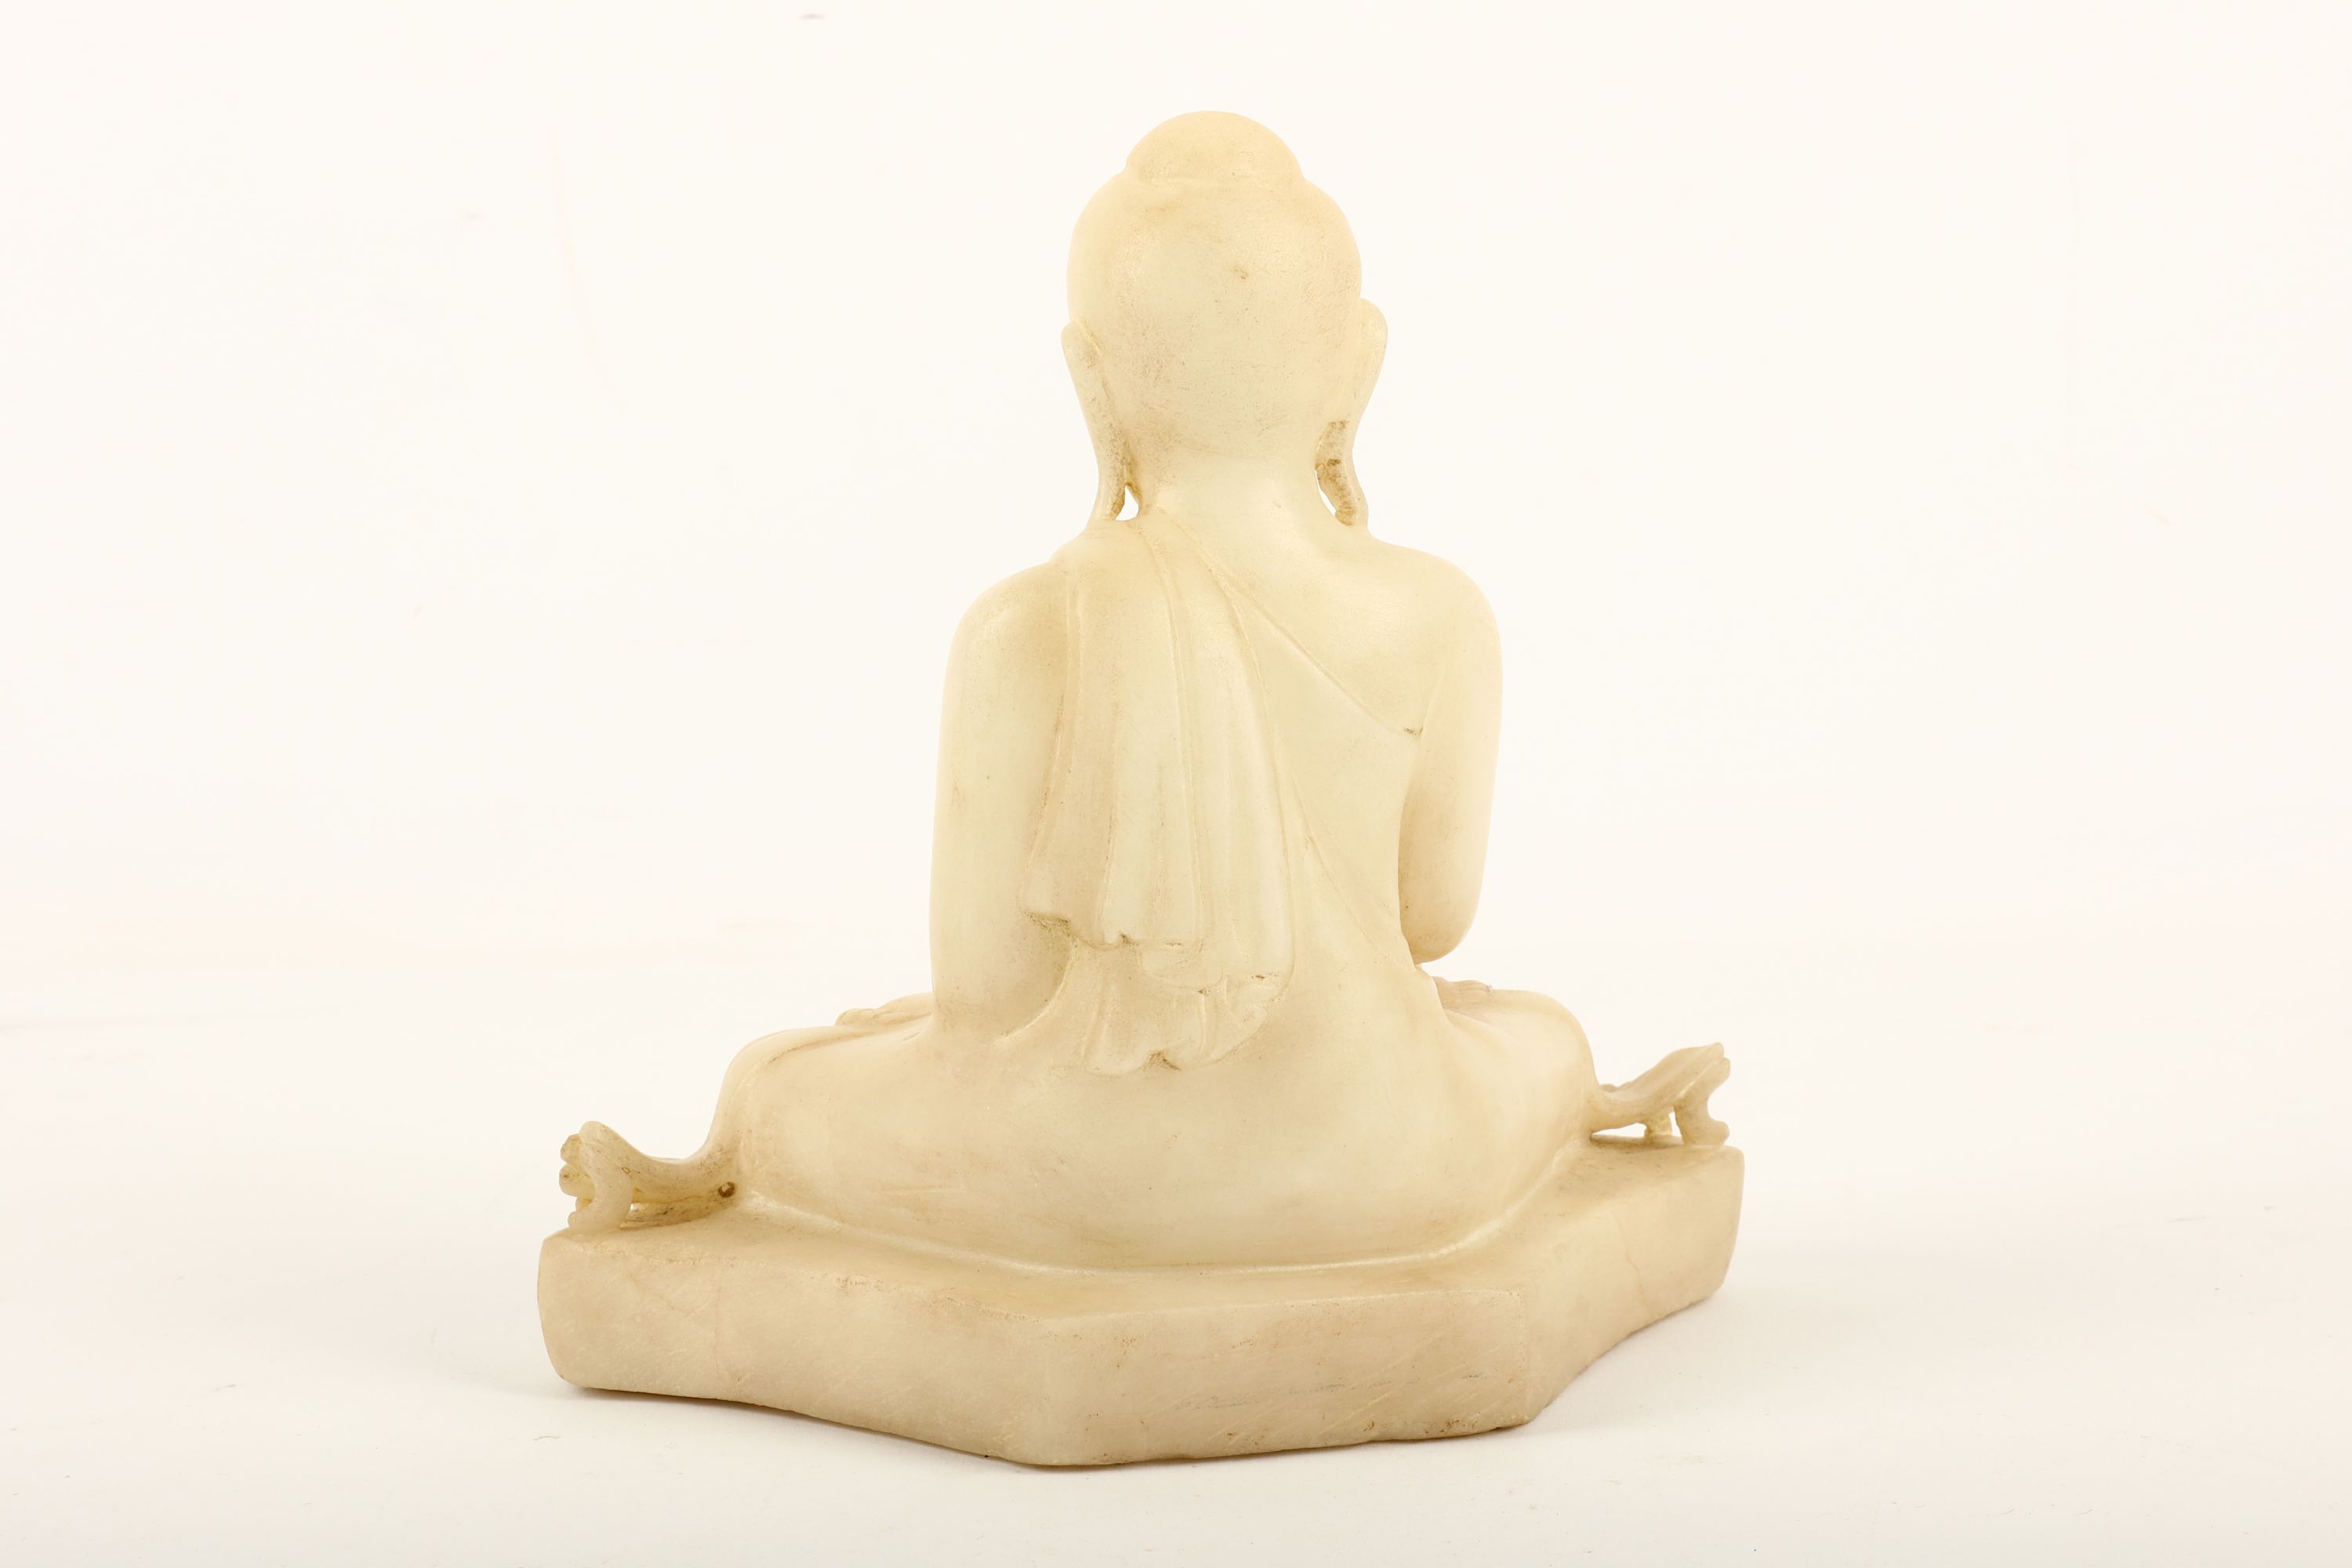 A carved Burmese white marble Buddha, sitting on a base in Bhumisparsha mudra wearing flowing robes, - Image 2 of 2